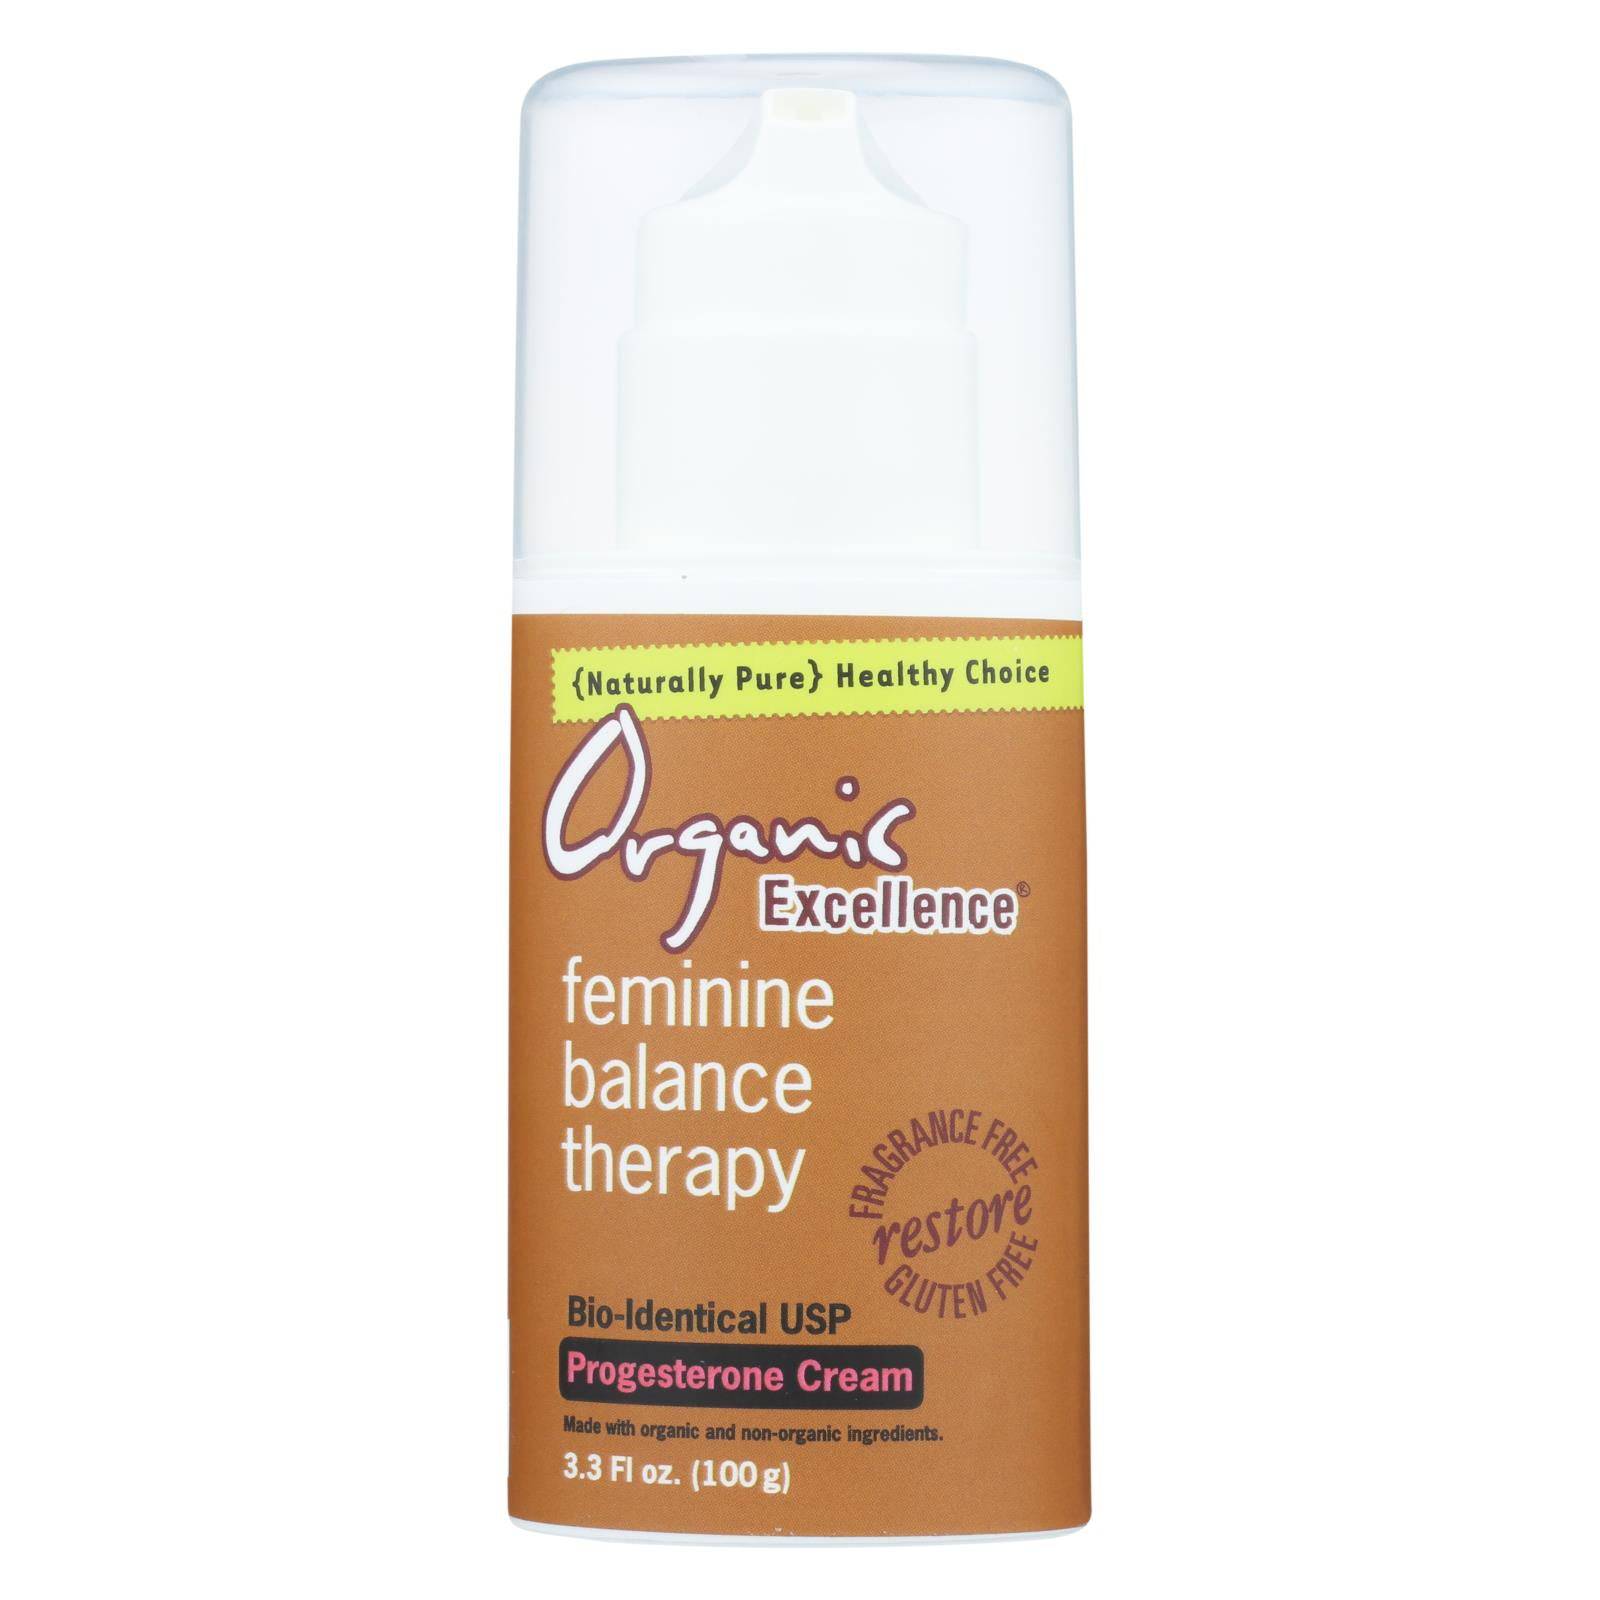 Buy Organic Excellence Feminine Balance Therapy - 3 Oz  at OnlyNaturals.us